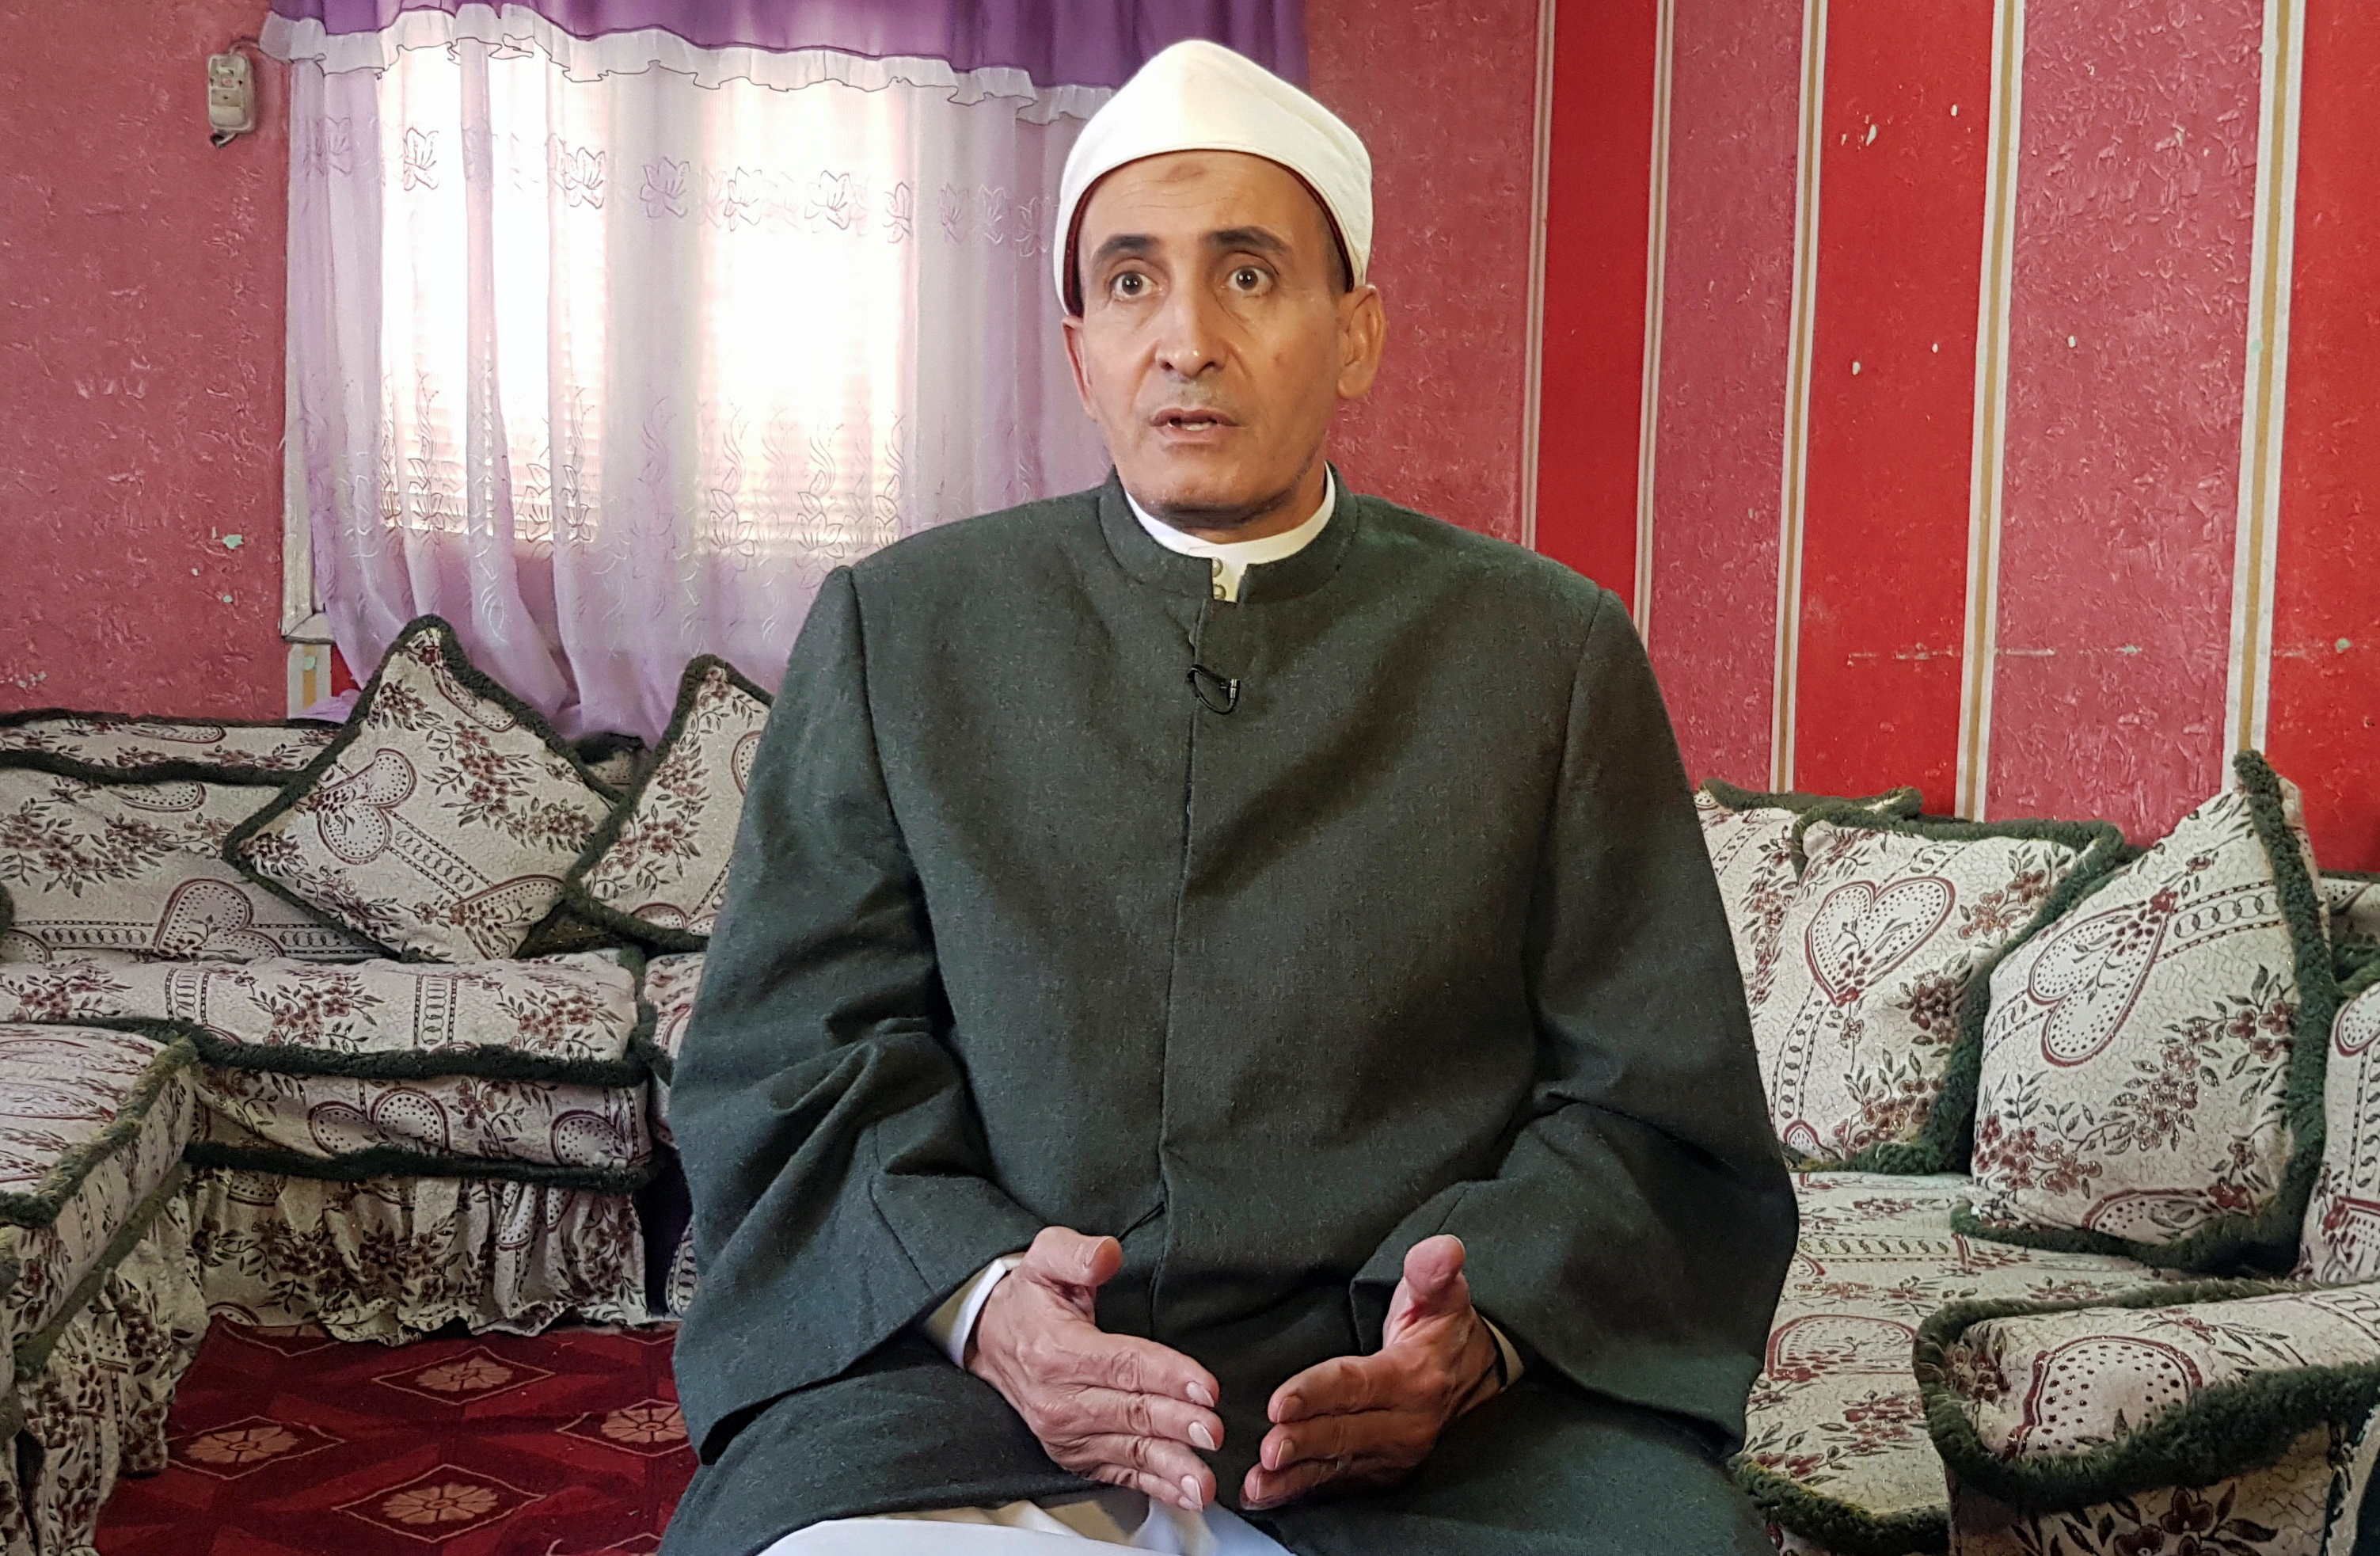 Shawki Abuzeid, Egyptian cleric and head of Al-Azhar’s mission to Afghanistan, speaks during an interview with Reuters in Cairo